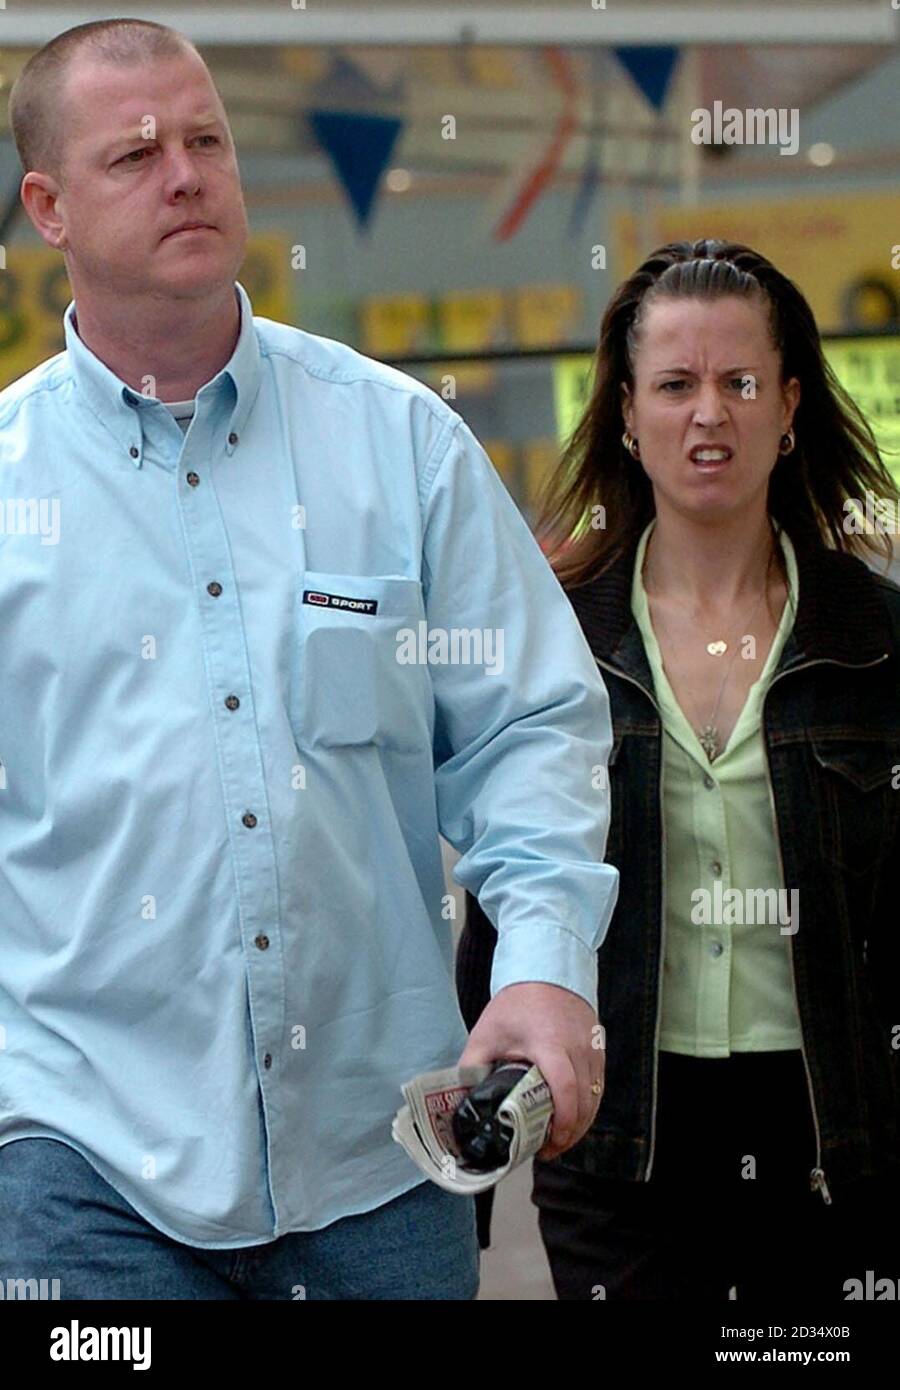 Michael Feehilly, 38, and his partner Toni Badcock, 30 arrive at Huntingdon Magistrates Court, Huntingdon, where Ms Badcock faced charges of being in charge of a dangerously out-of-control dog. PRESS ASSOCIATION Photo Picture date Wednesday September 27 2006. Four year Old George Brown, from Huntingdon underwent four hours of reconstructive surgery at Adeenbrooke's Hospital Cambridge after an attack by an American Bulldog owned by the couple. See PA Story COURTS Bulldog. Photo credit should read Chris Radburn/PA Stock Photo